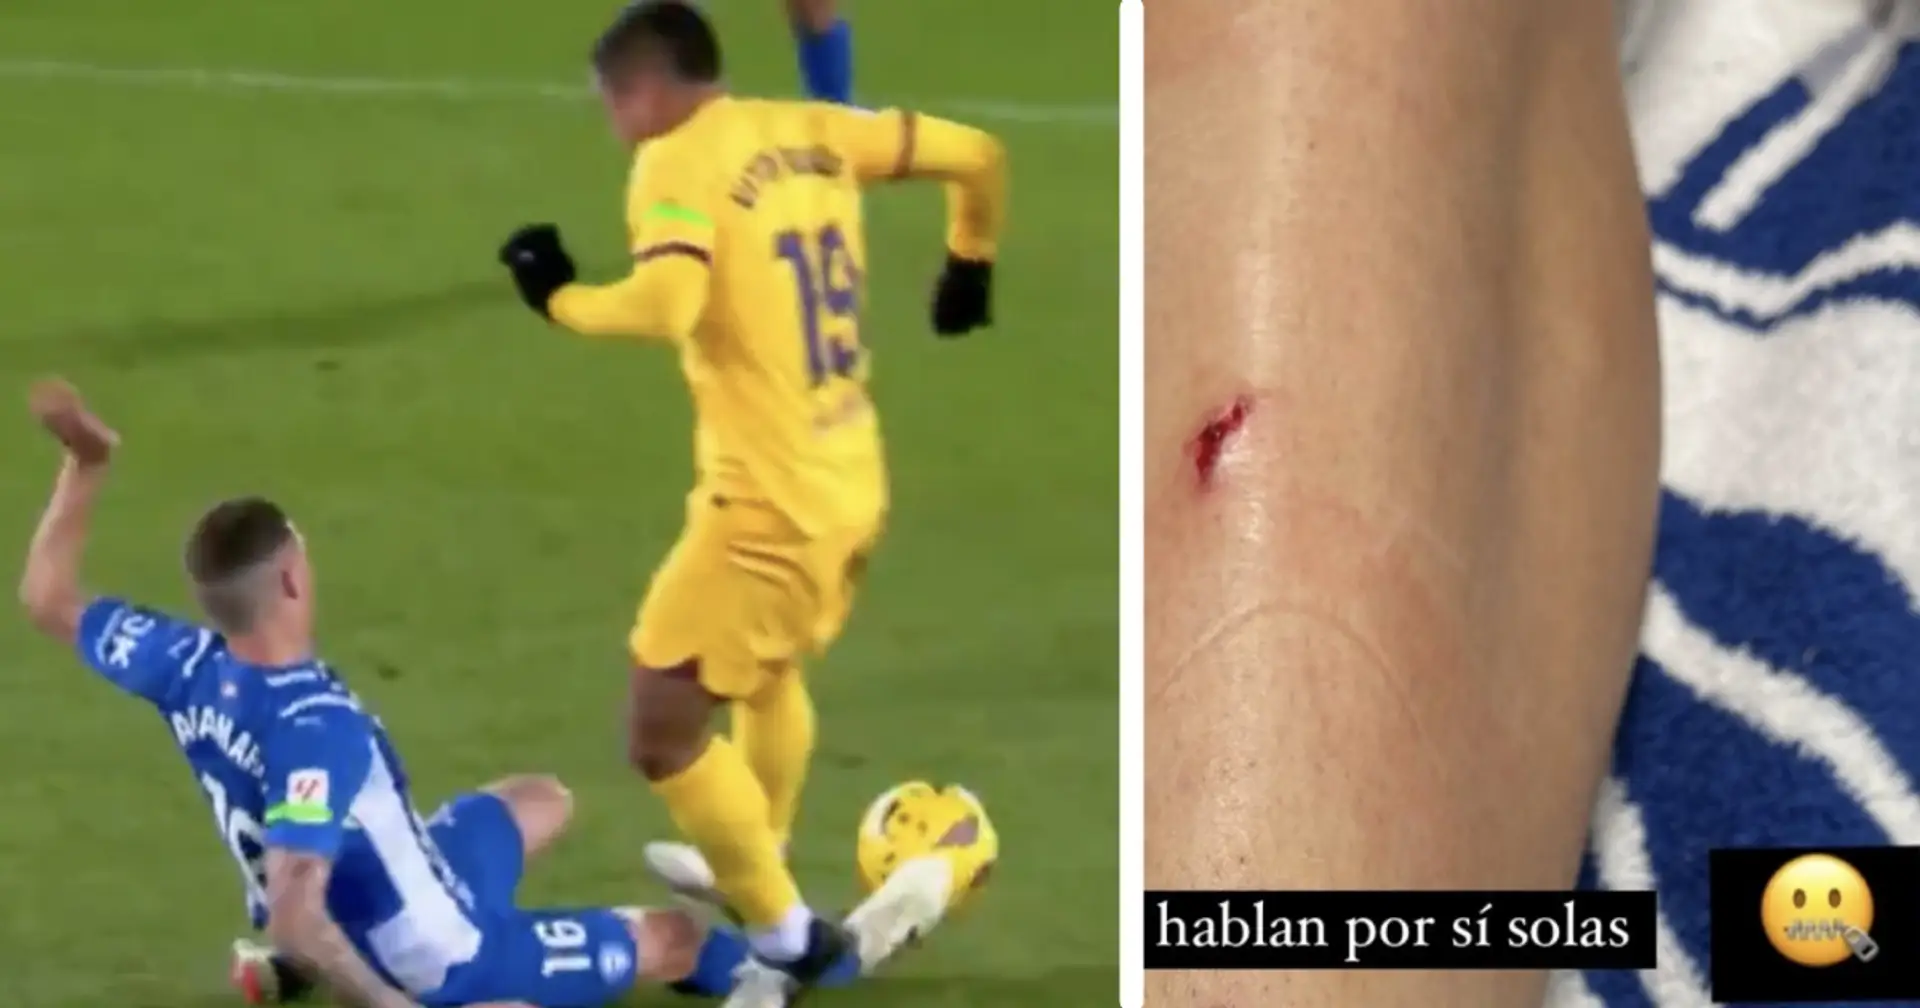 Alaves defender (on loan from Real Madrid) shows injured leg amid Vitor Roque's controversial red card